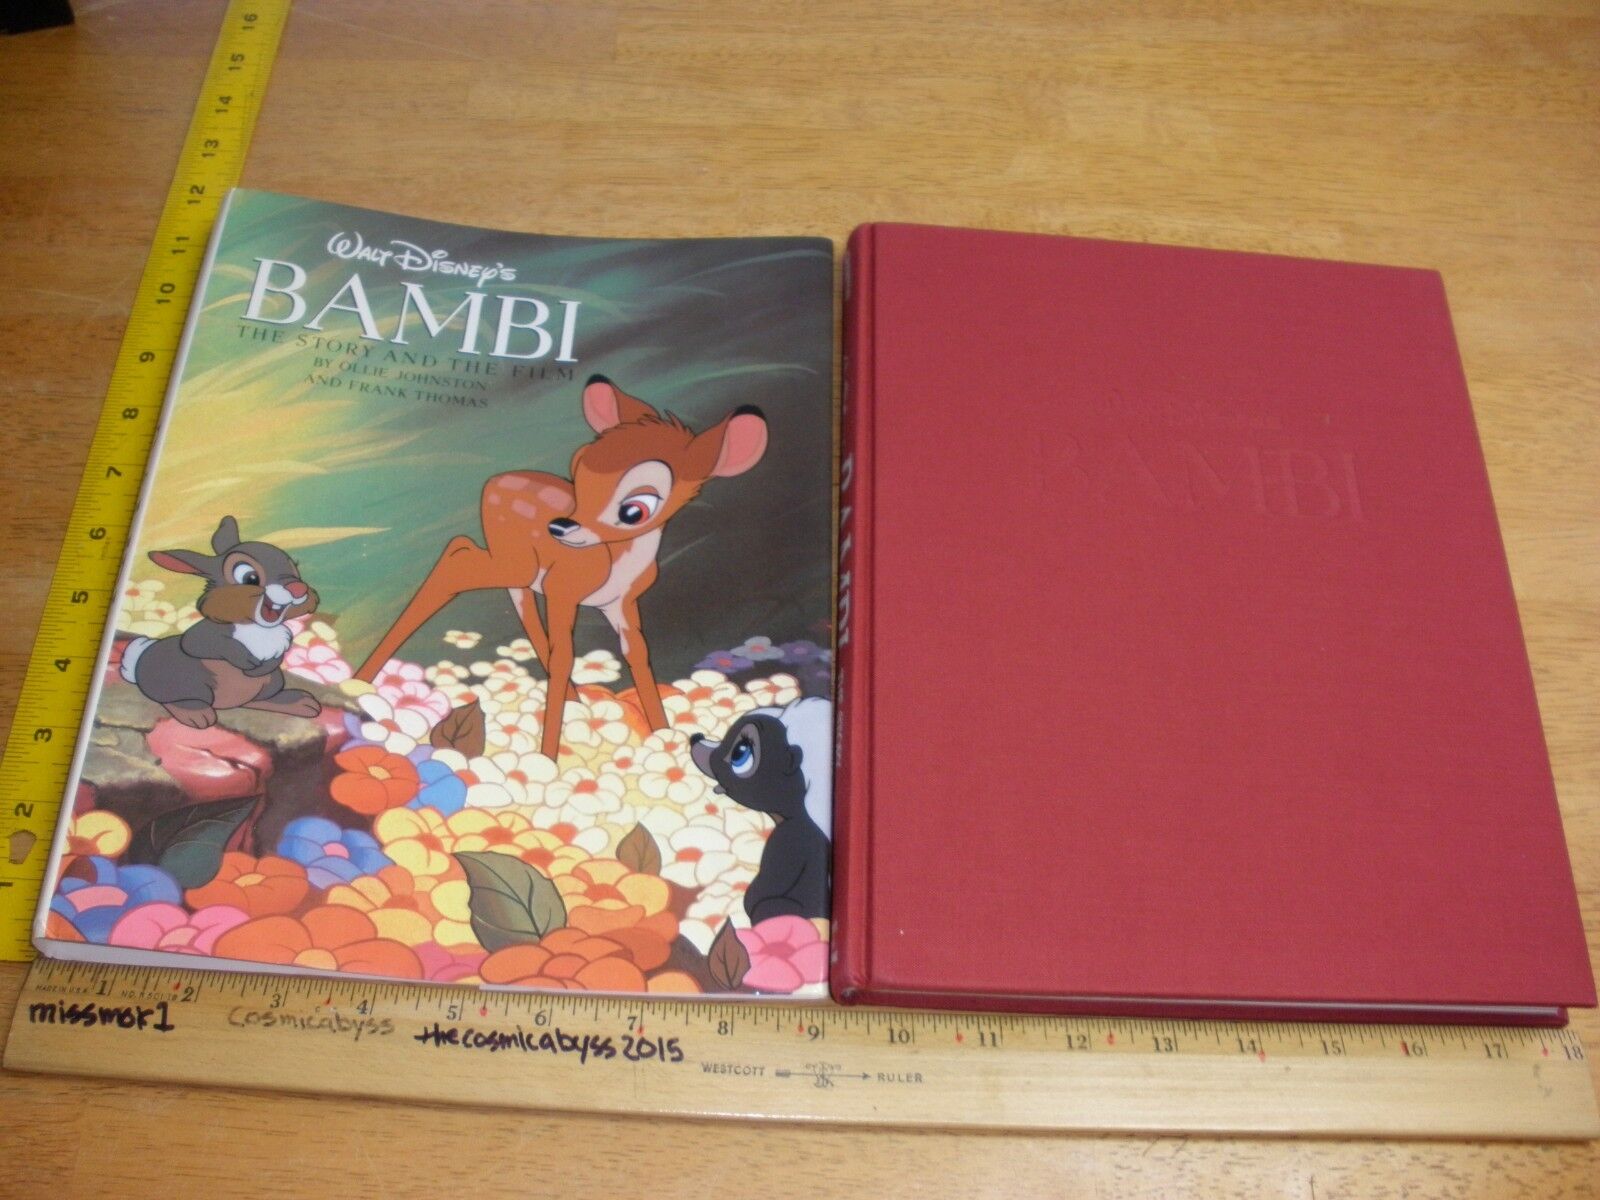 Bambi The Story of the Film book SIGNED Ollie Johnston and Frank Thomas 1st 1990